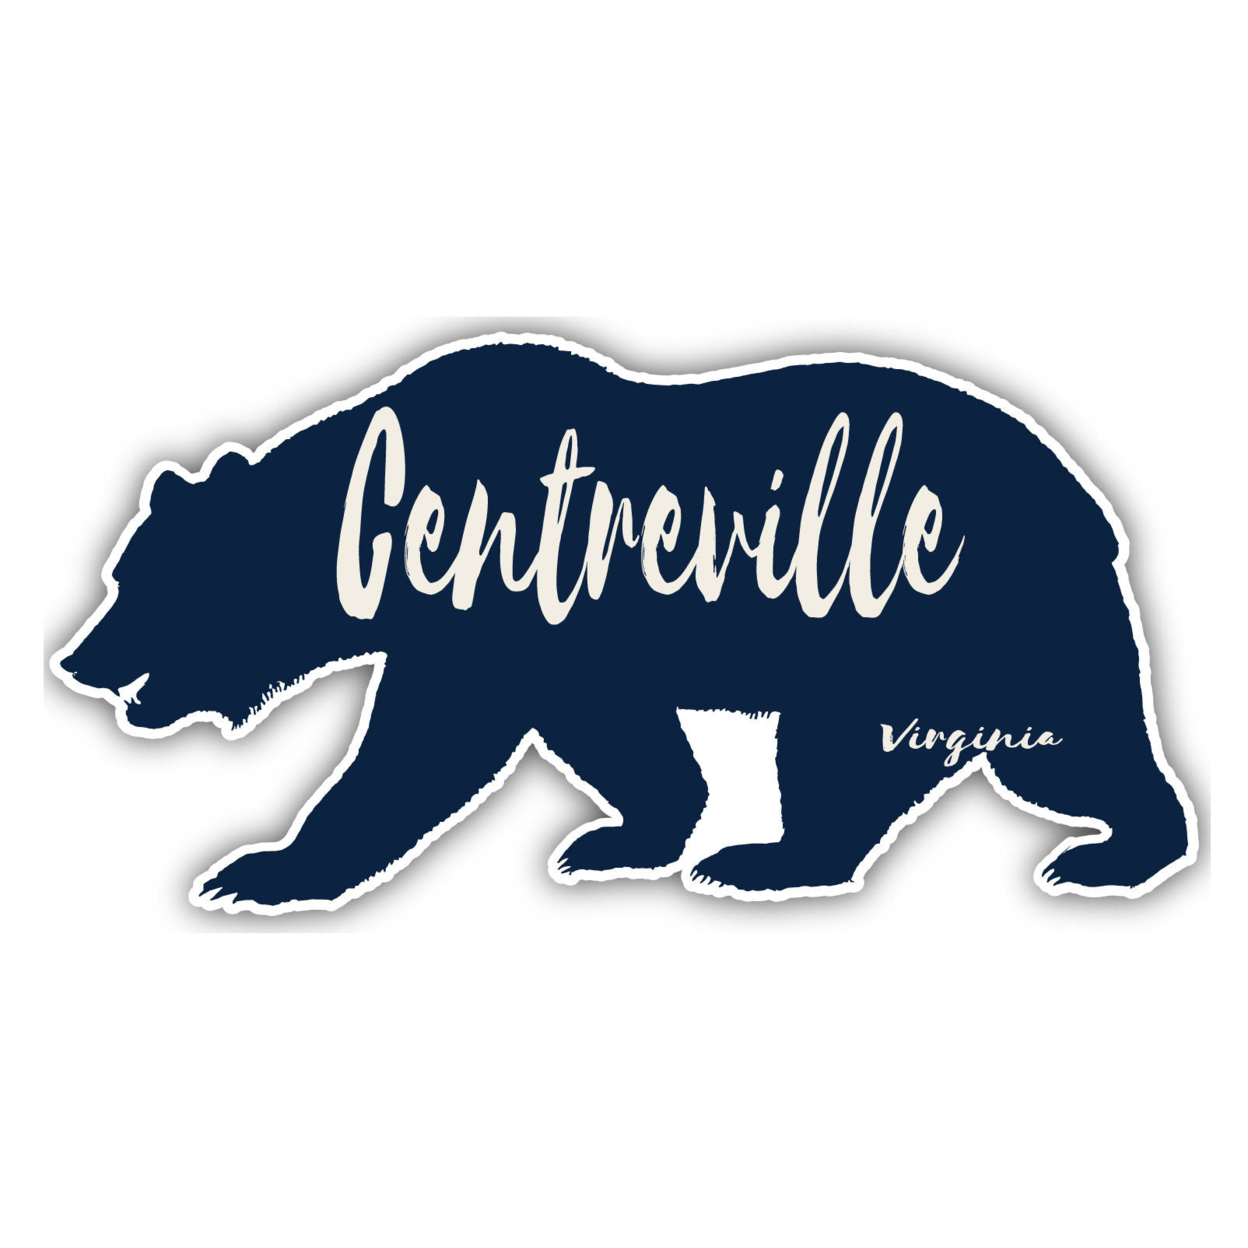 Centreville Virginia Souvenir Decorative Stickers (Choose Theme And Size) - 4-Pack, 6-Inch, Bear